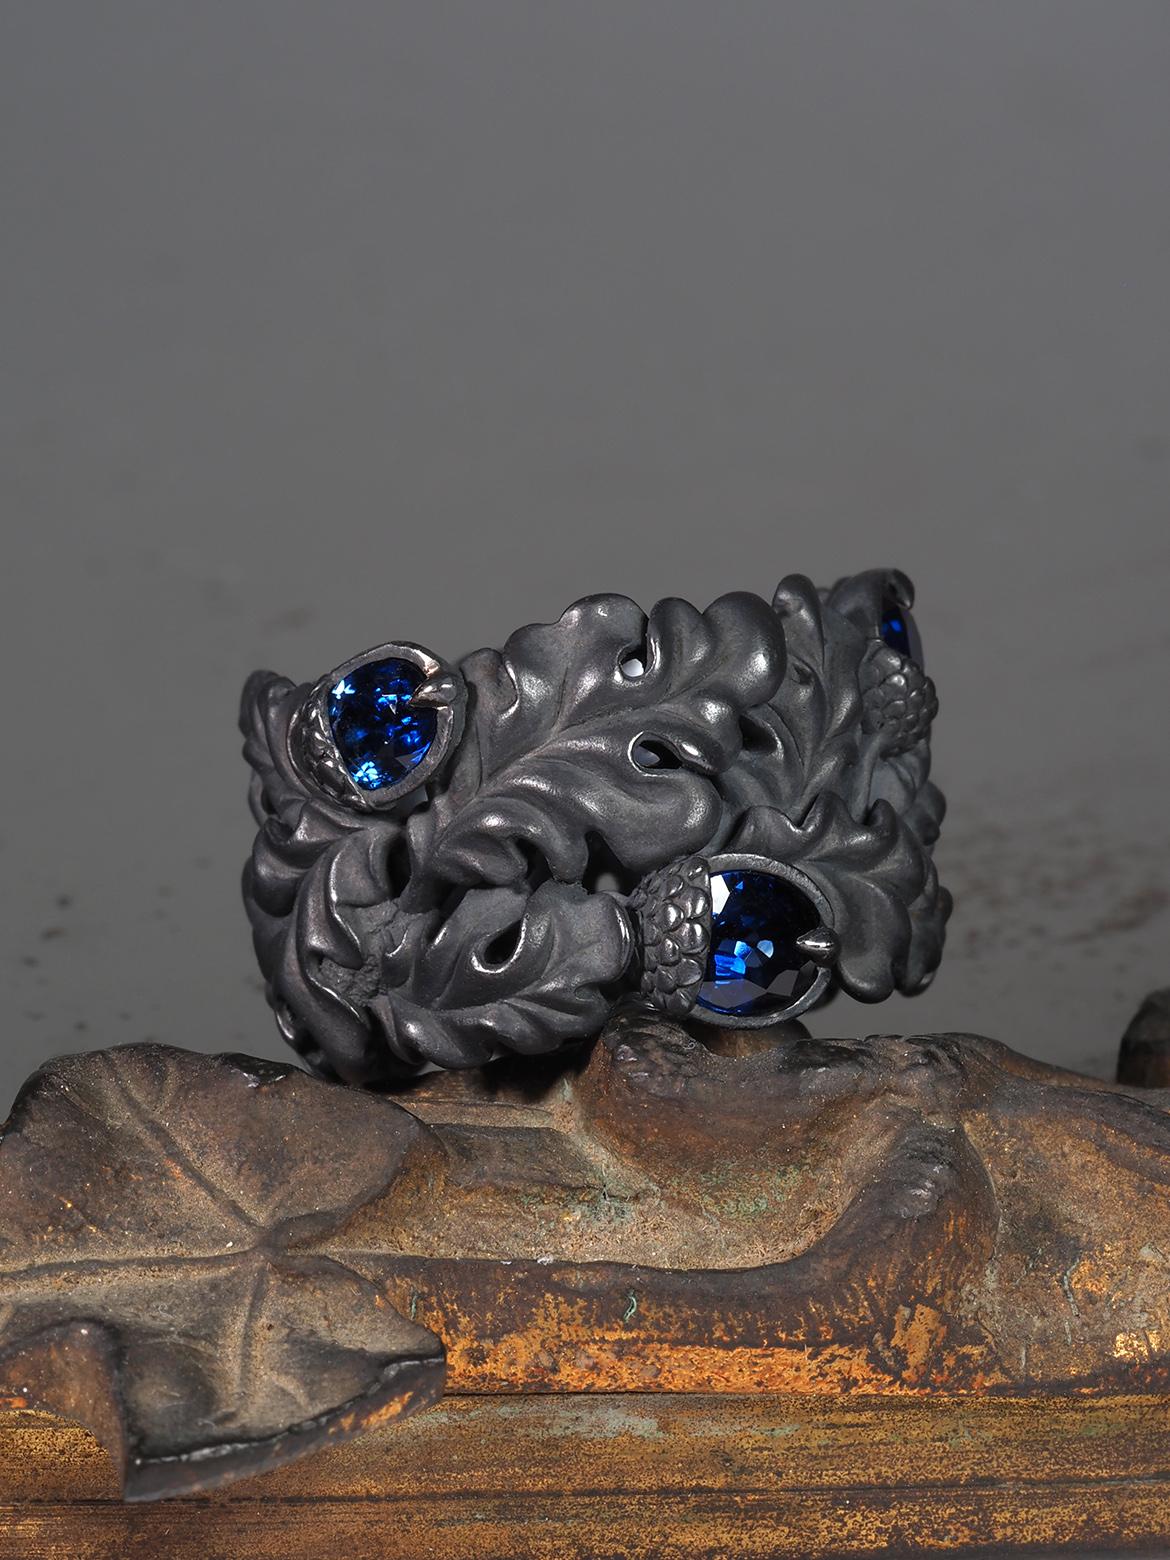 Wide band Oak and 6 acorns ring in cobalt grey patinated silver with 6 natural oval-cut blue genuine Sapphires
Sapphires gemstones origin - Sri Lanka
total stones weight - 3.9 carats
ring size - 9.75 US
ring weight - 21 grams